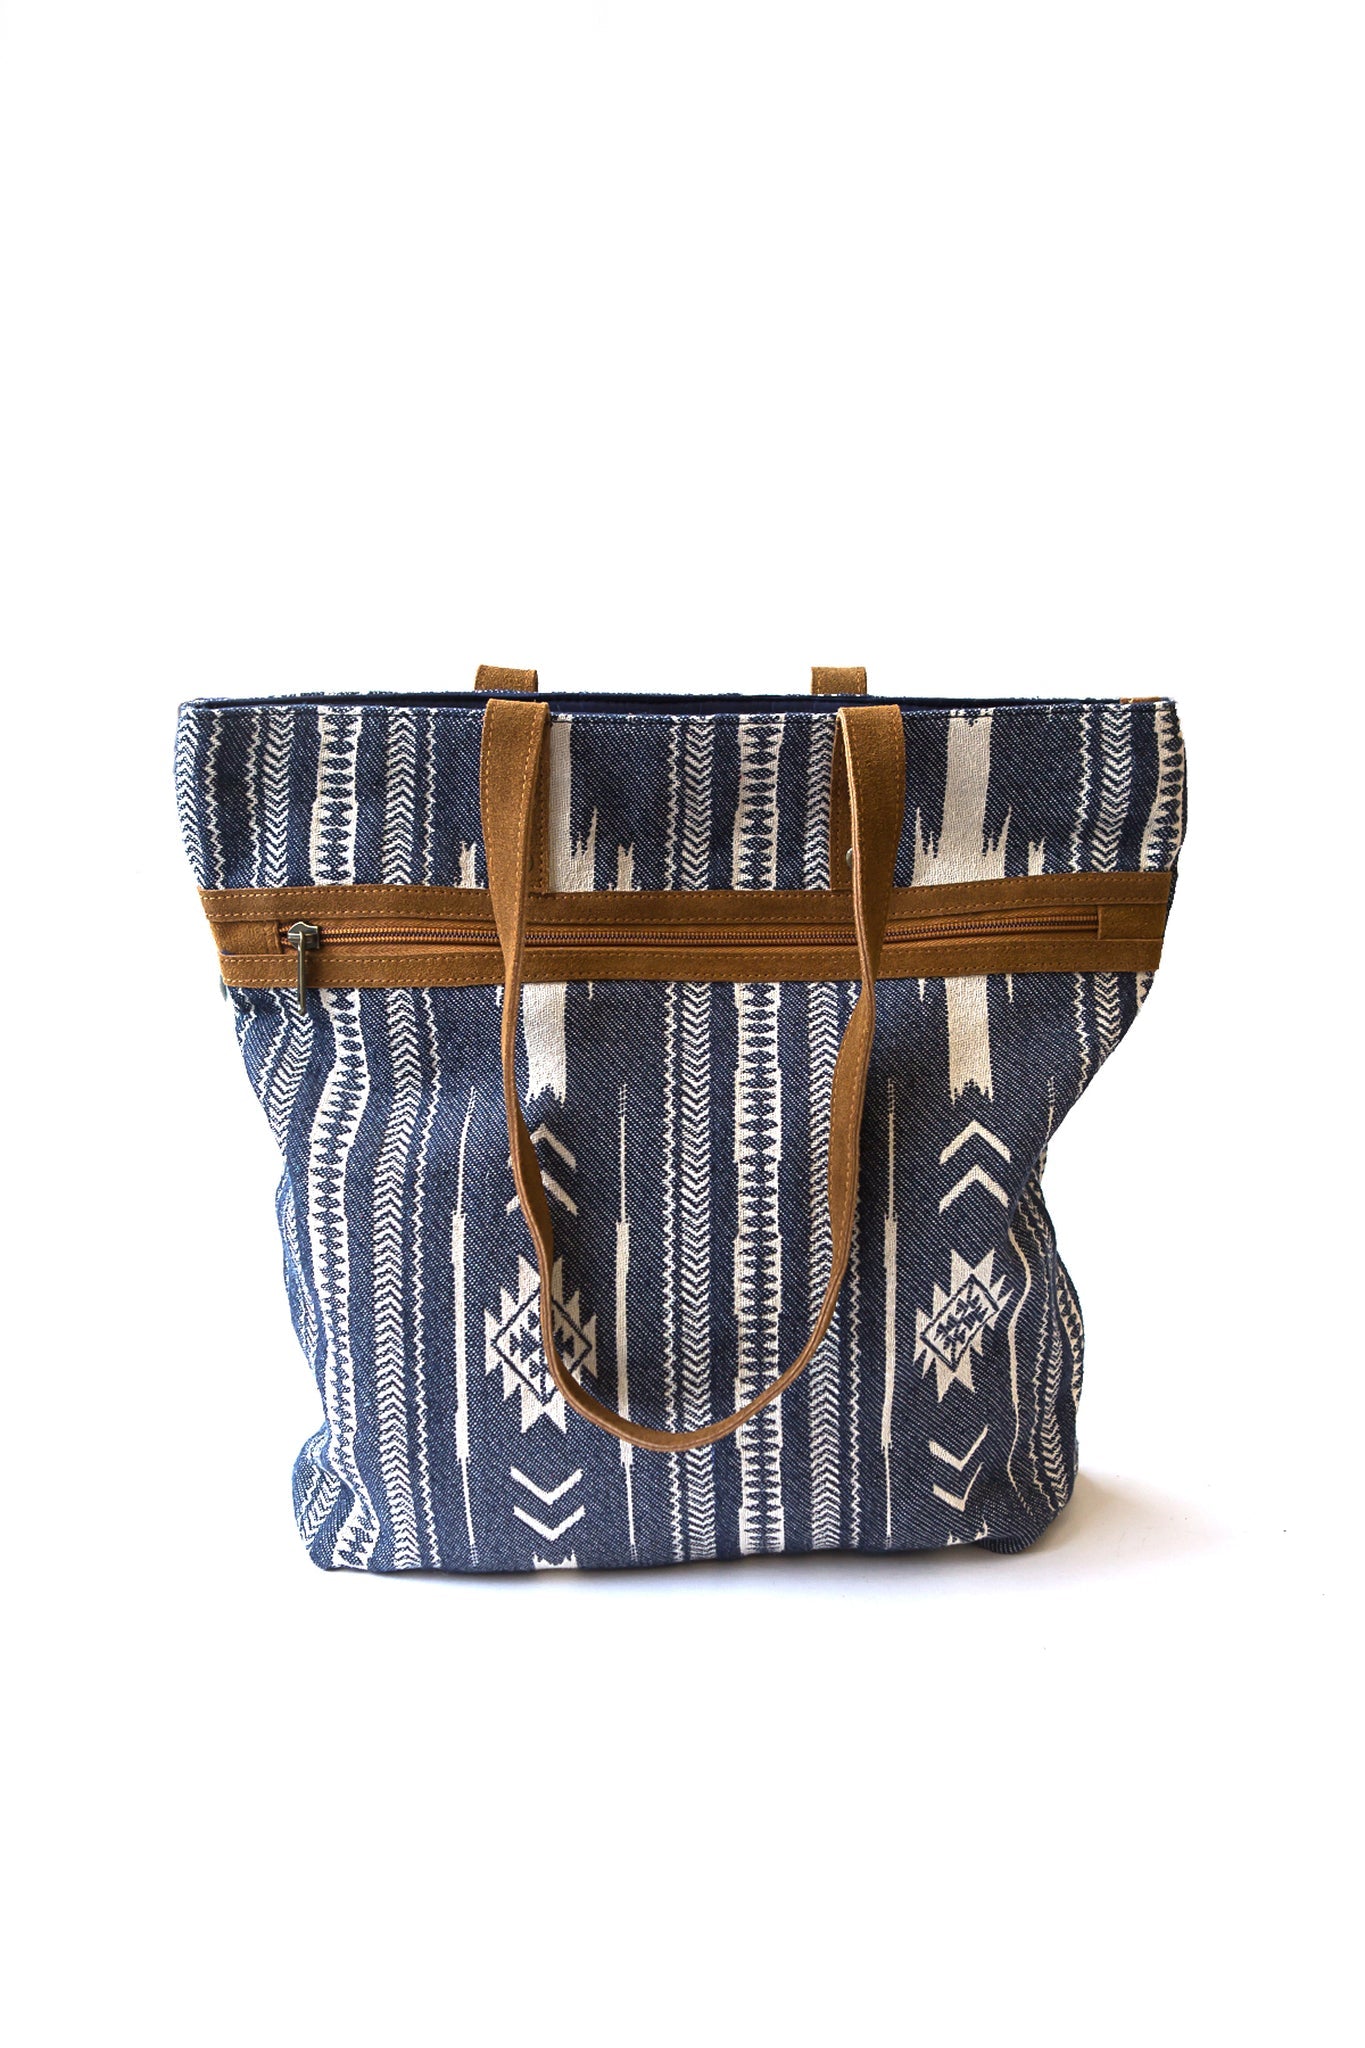 Rover Patterned Purse